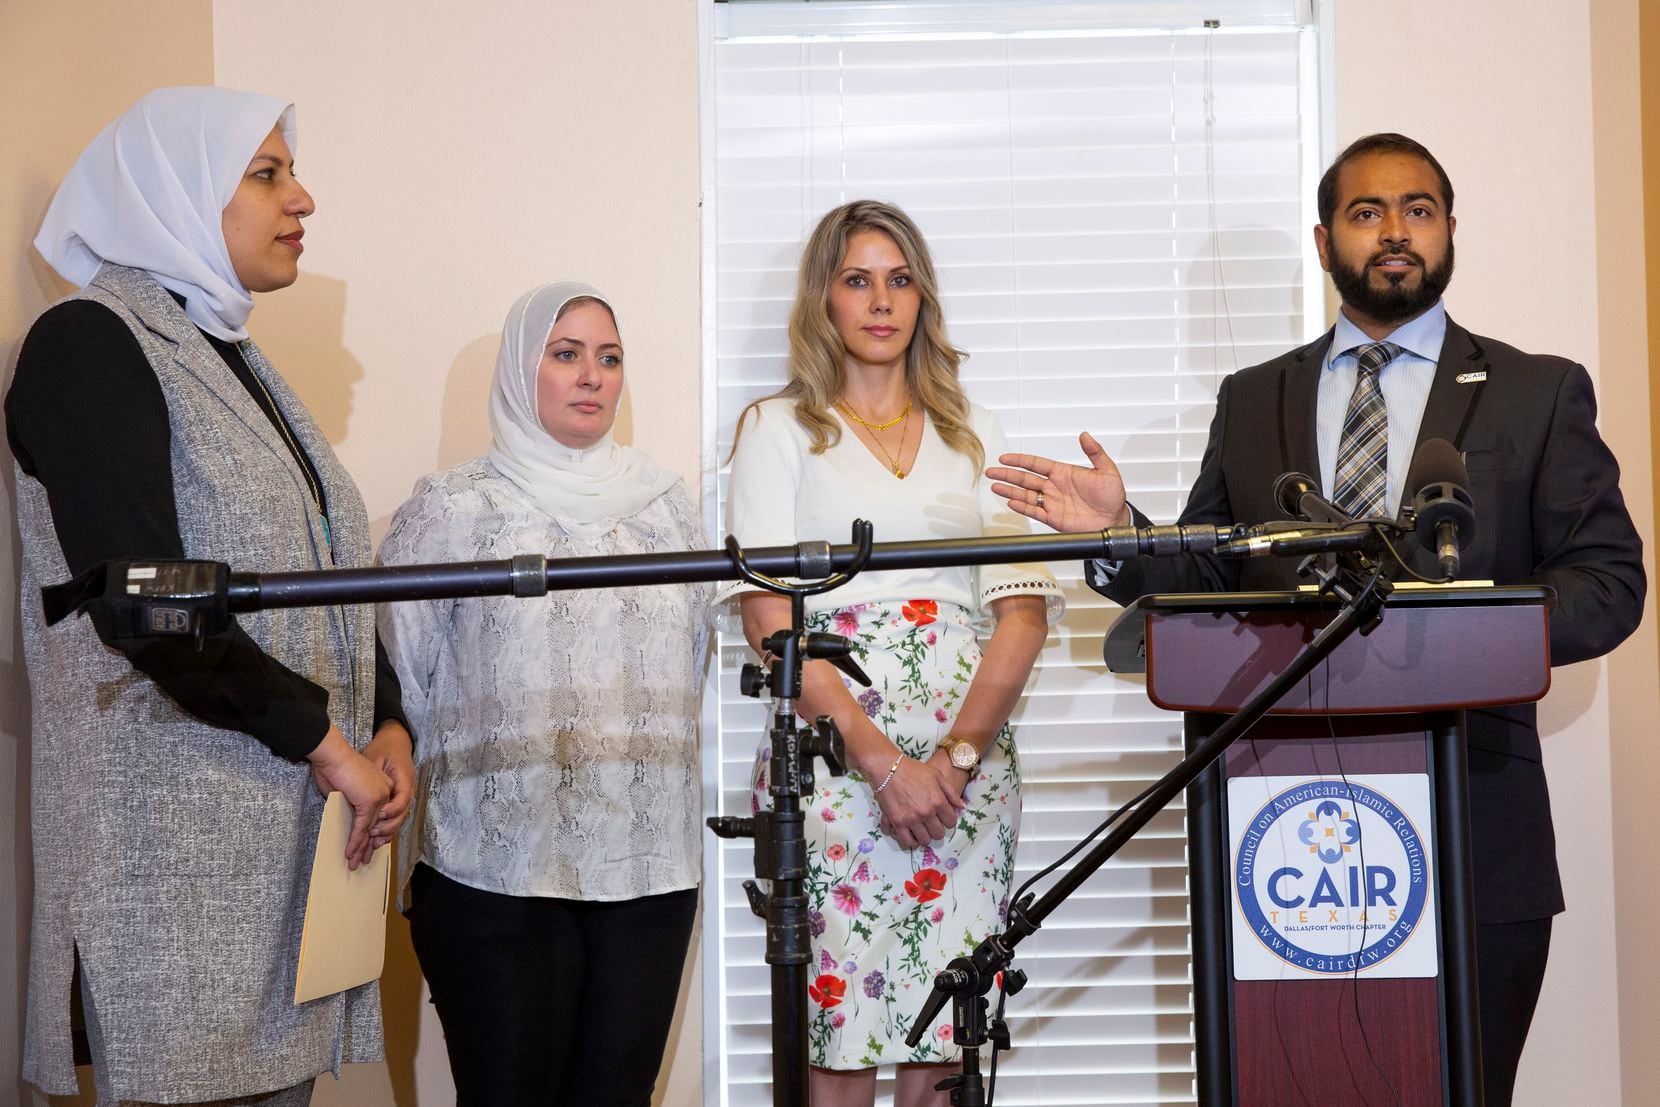 (From right) Faizan Syed, Executive Director of the DFW chapter of the Council on American-Islamic Relations speaks as sisters Muna Kowni and Fatima Altakrouri with their attorney Marwa Elbially listen at a press conference outlining a complaint the sisters filed against Southwest Airlines for alleged religious discrimination on Tuesday, June 1, 2021, in Plano. (Juan Figueroa/The Dallas Morning News)